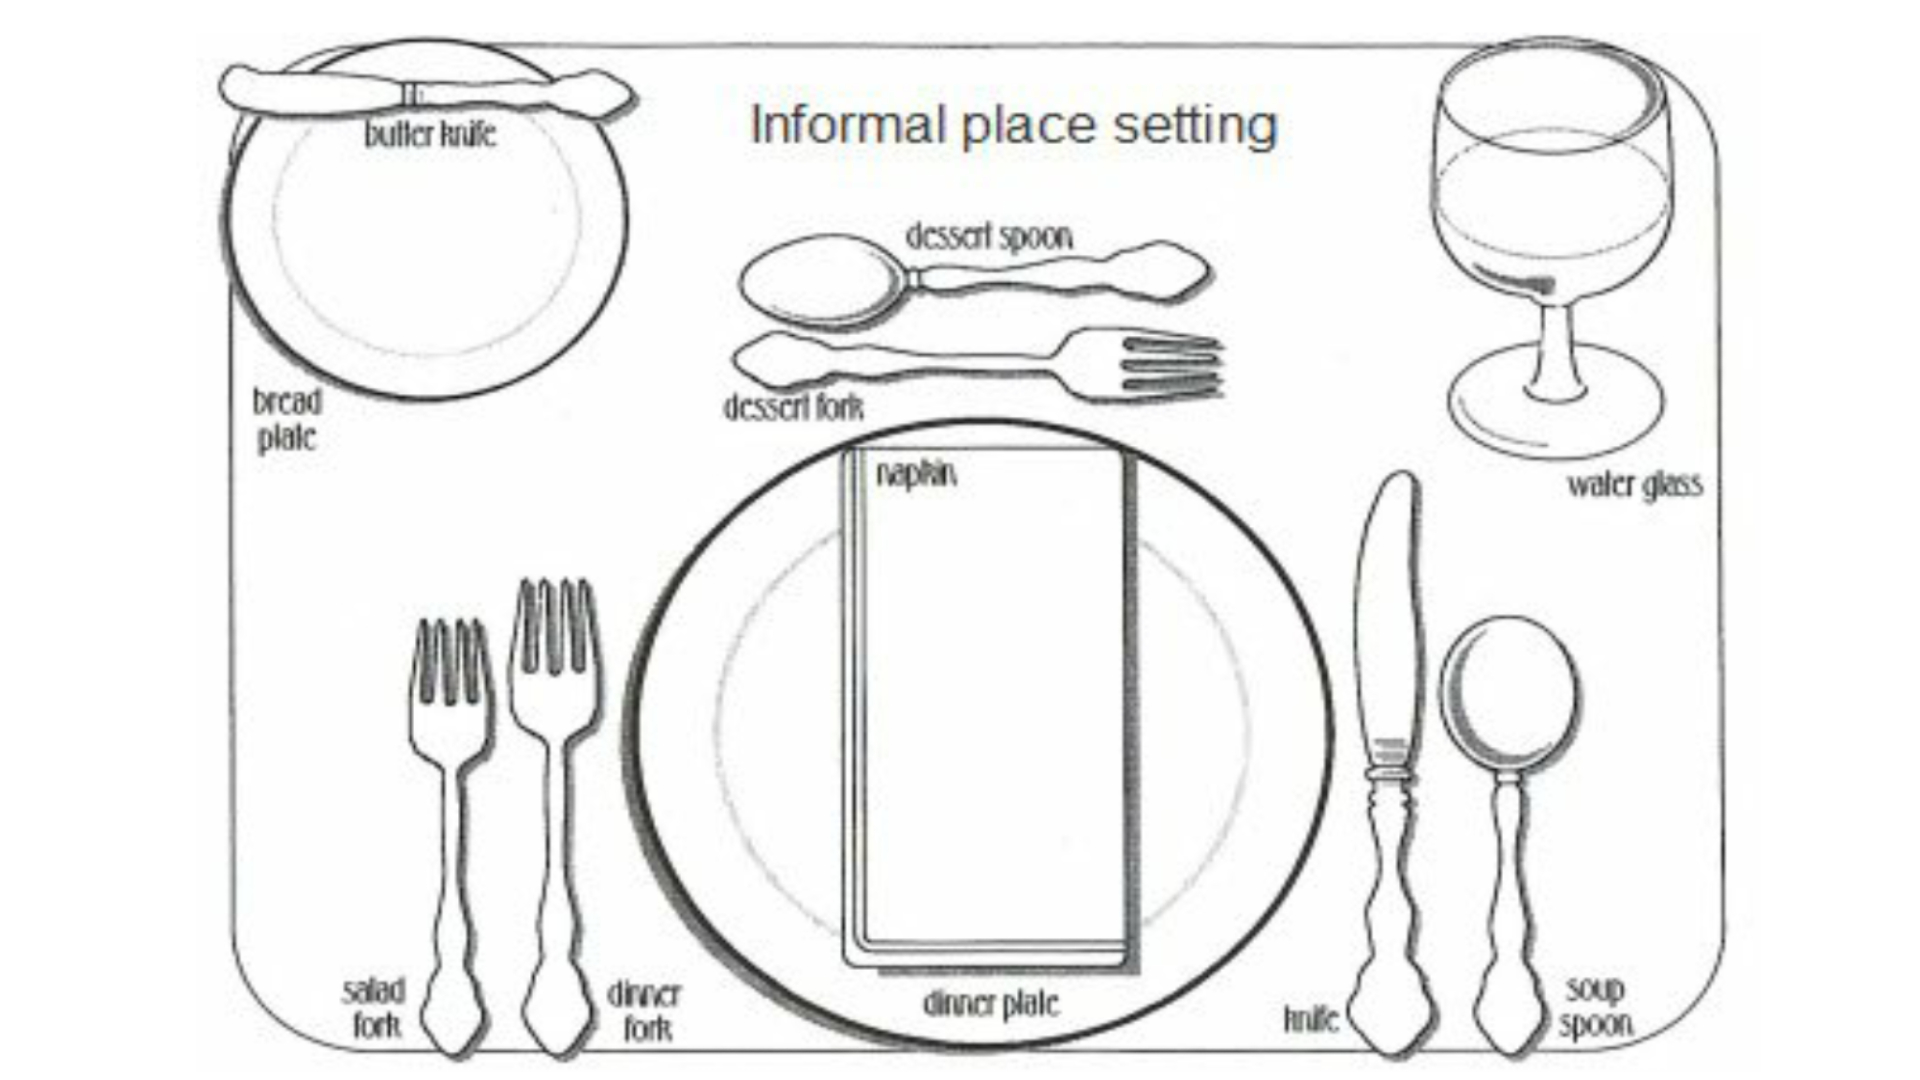 Table Setting Diagram Solved The Diagram Below Shows An Informal Place Setting